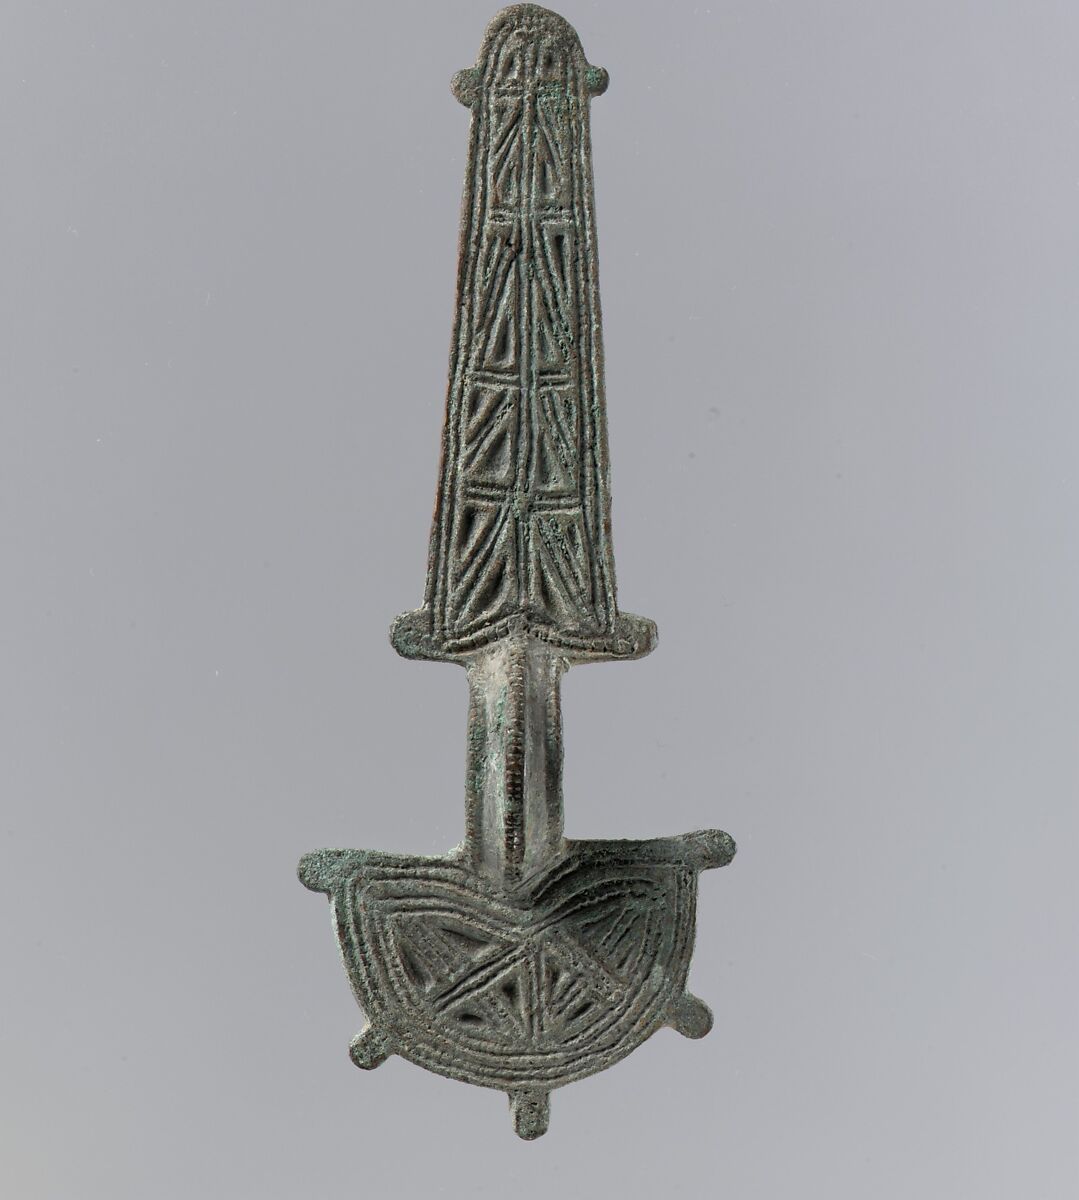 Bow Brooch, Copper alloy, cast, "tinned" surface; iron spring and pin, Visigothic 